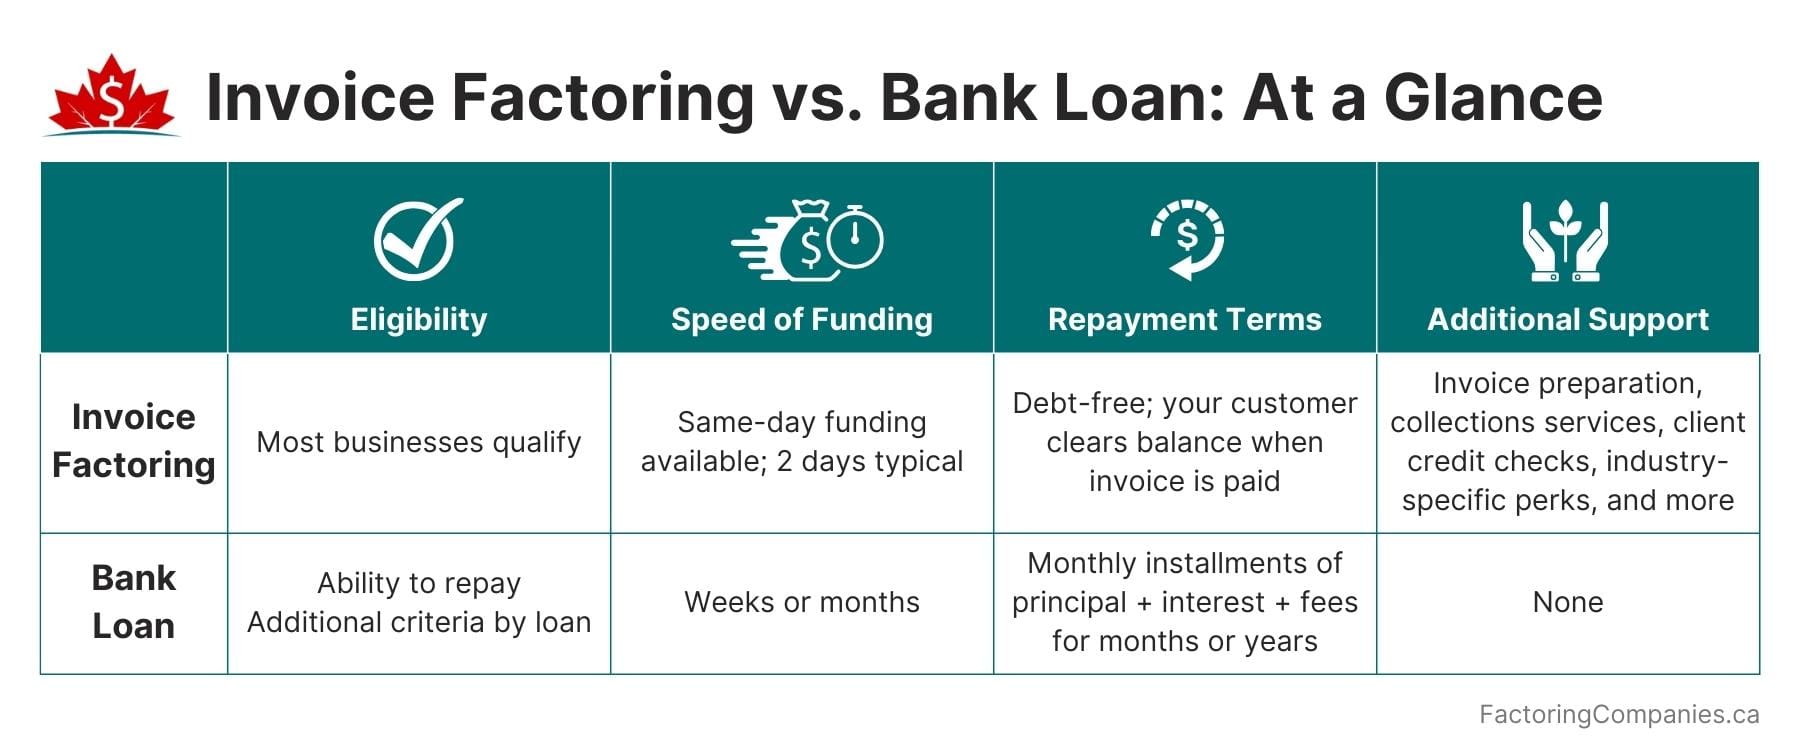 Key Differences: Invoice Factoring vs. Bank Loan